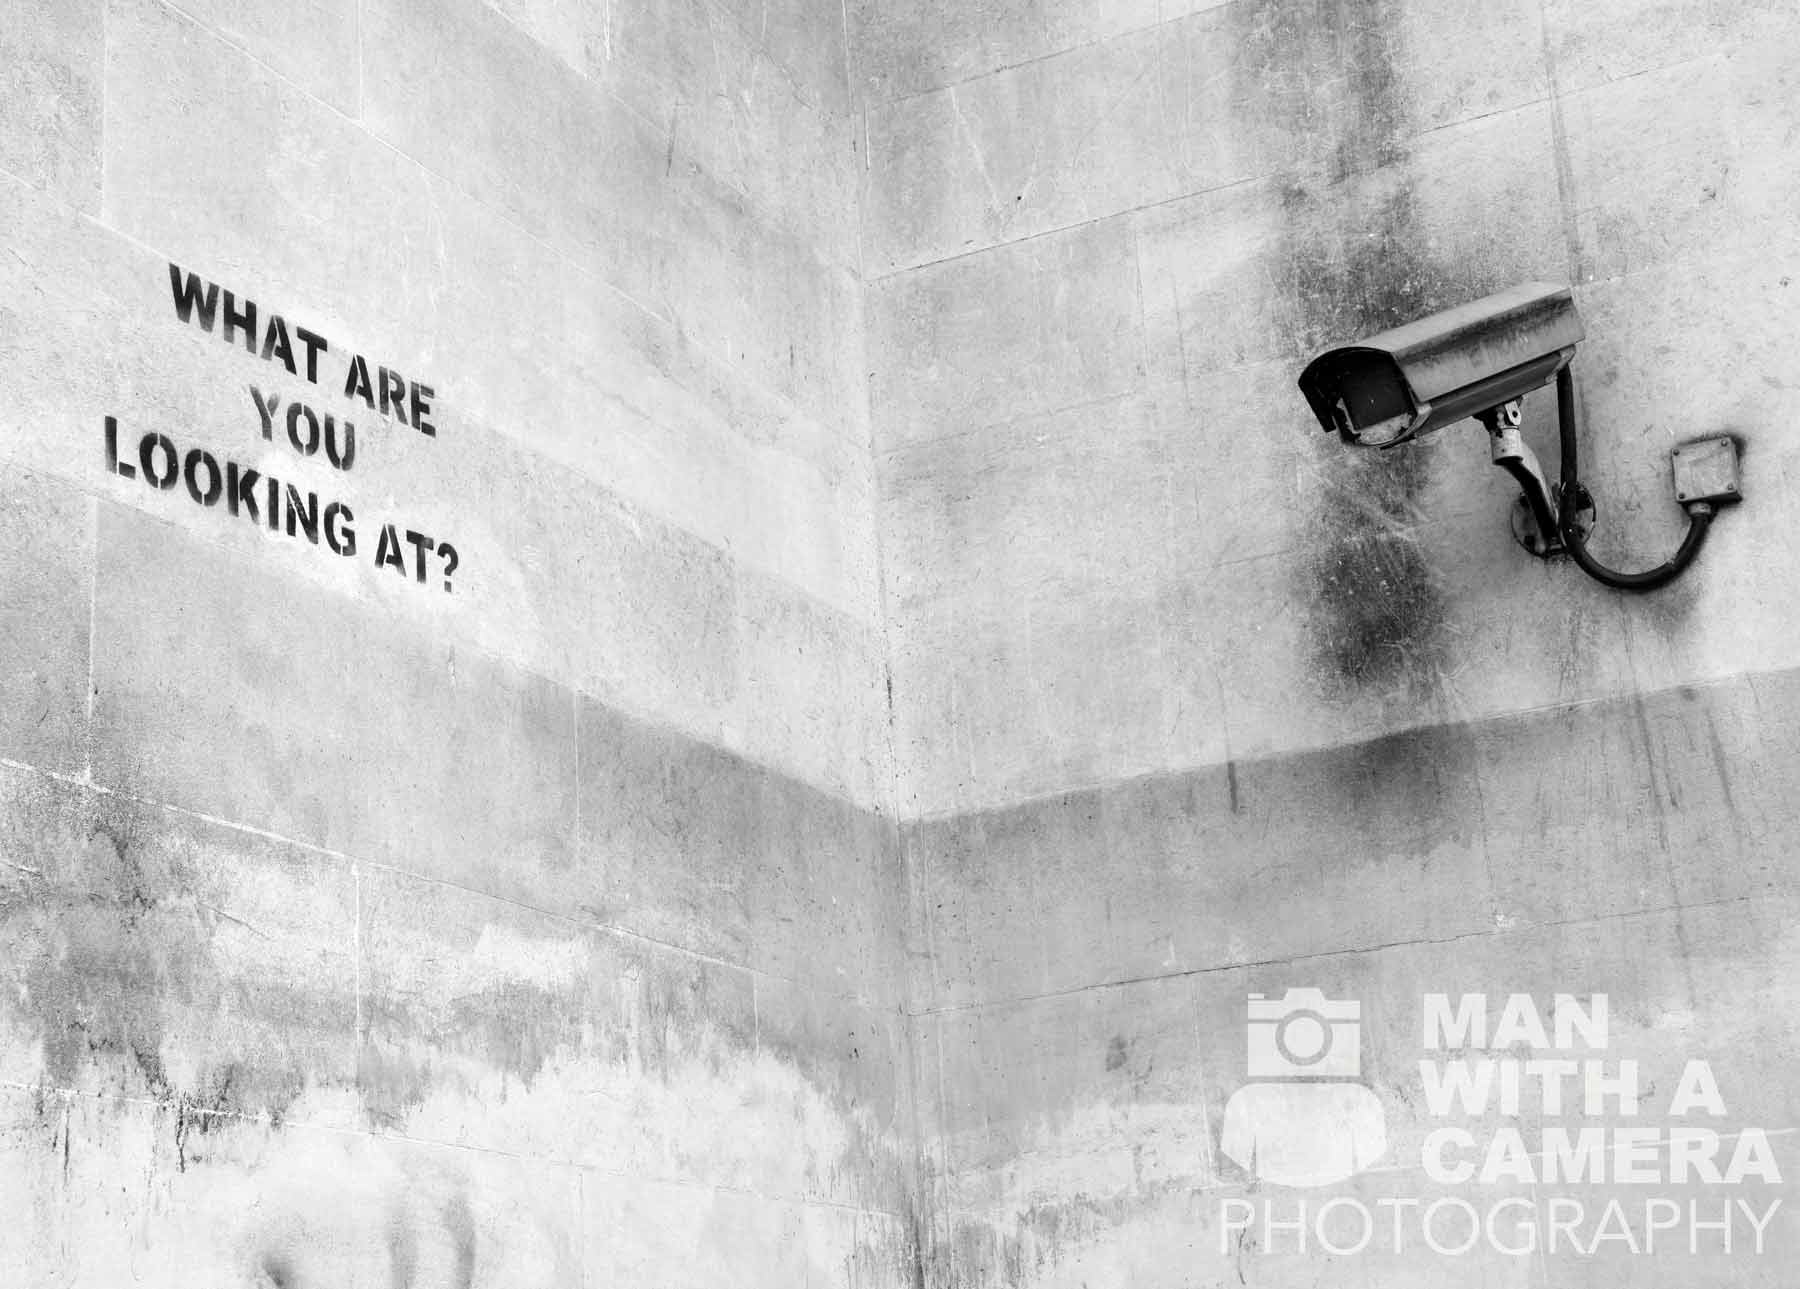 banksy-what-are-you-looking-at-cctv